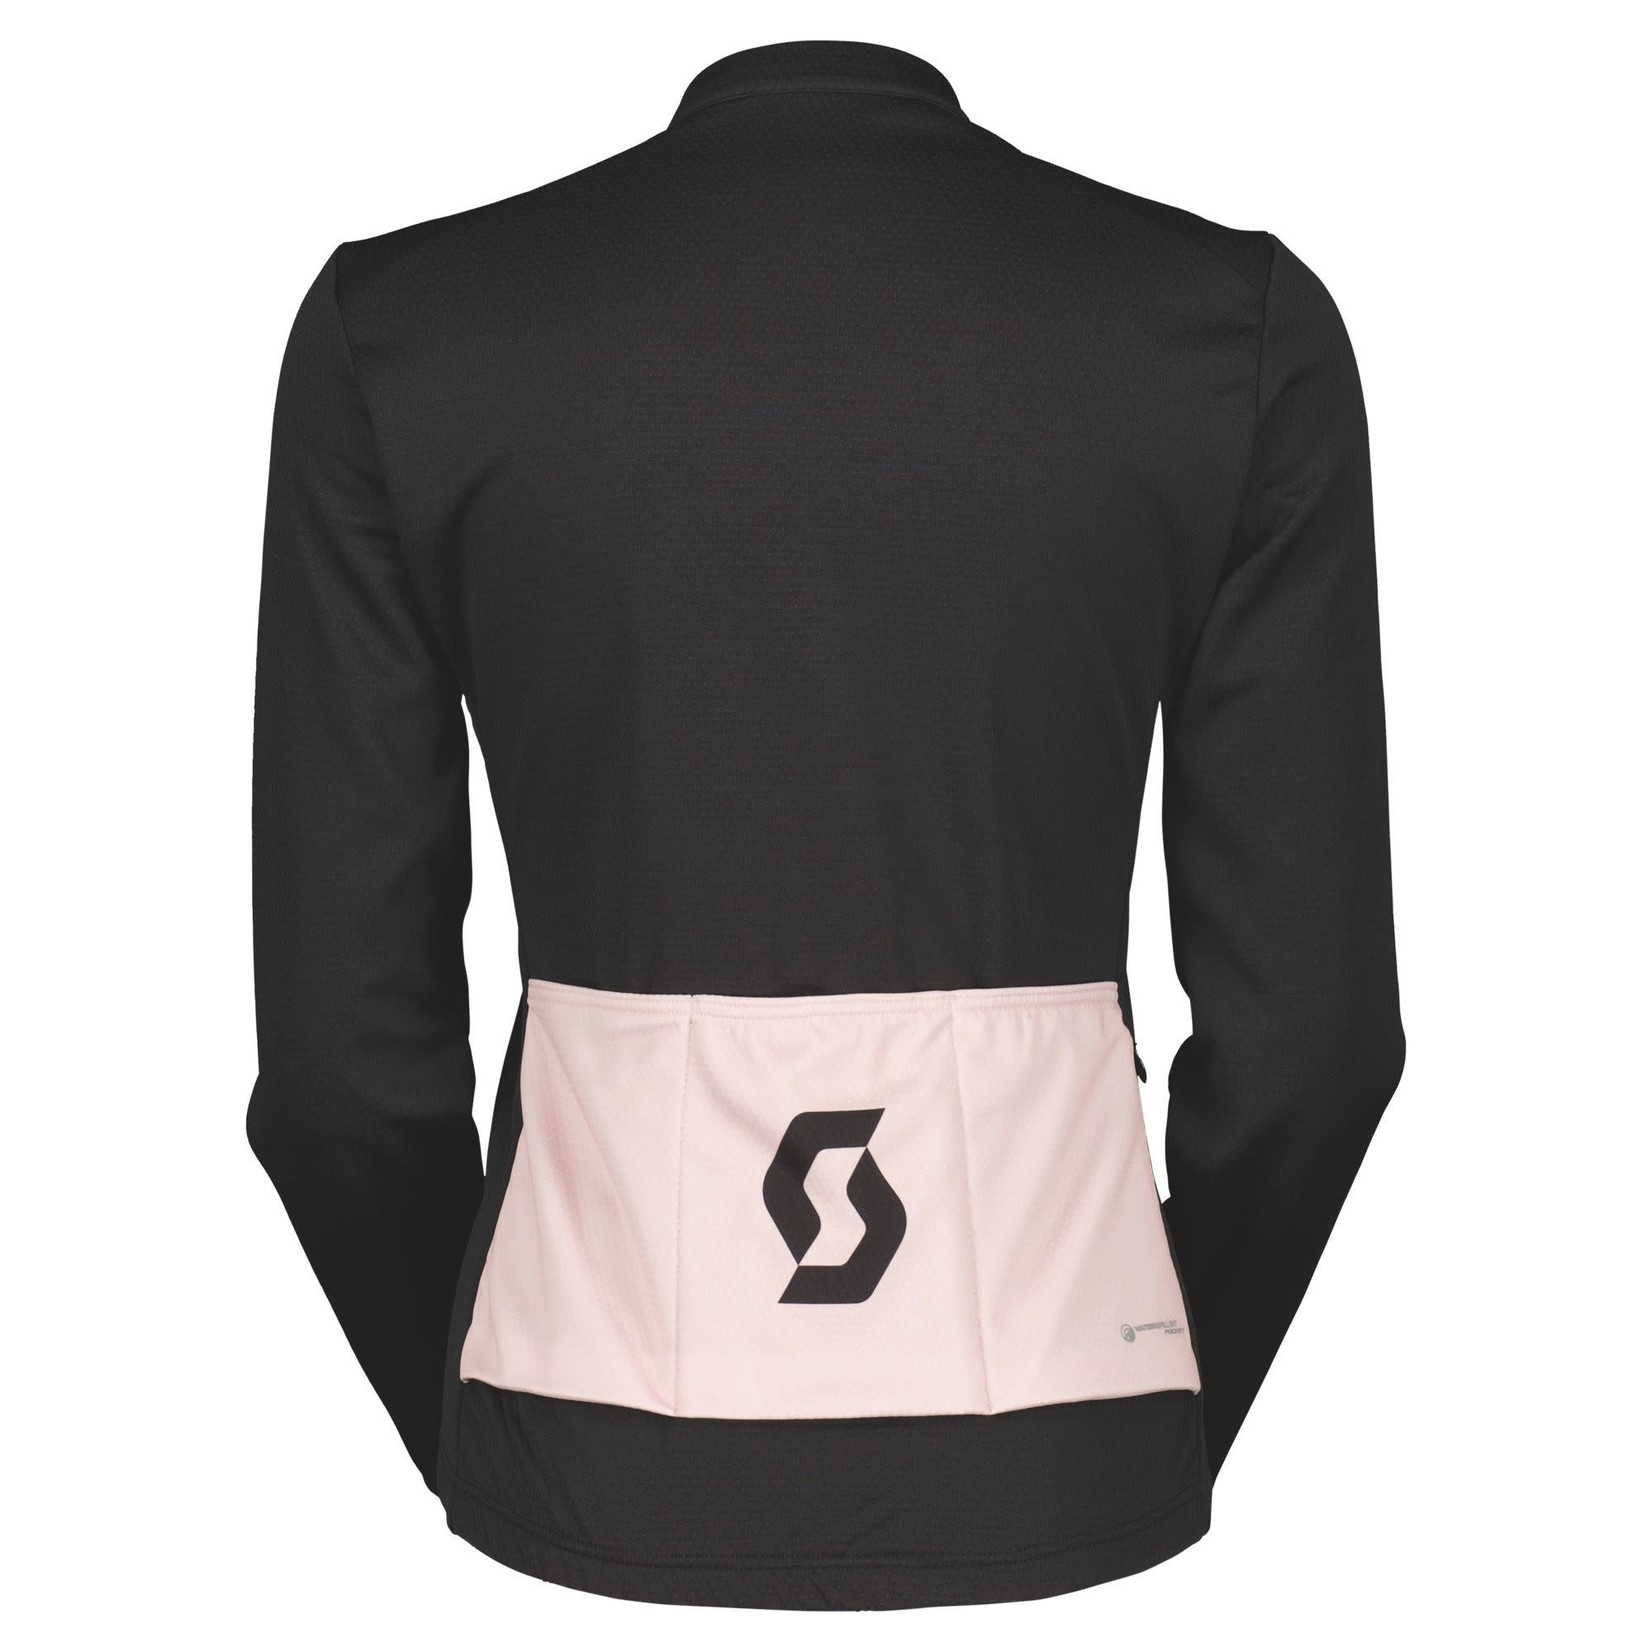 Maillot à Manches Longues RC Warm W'S Black/Sweet Pink XS - 271582